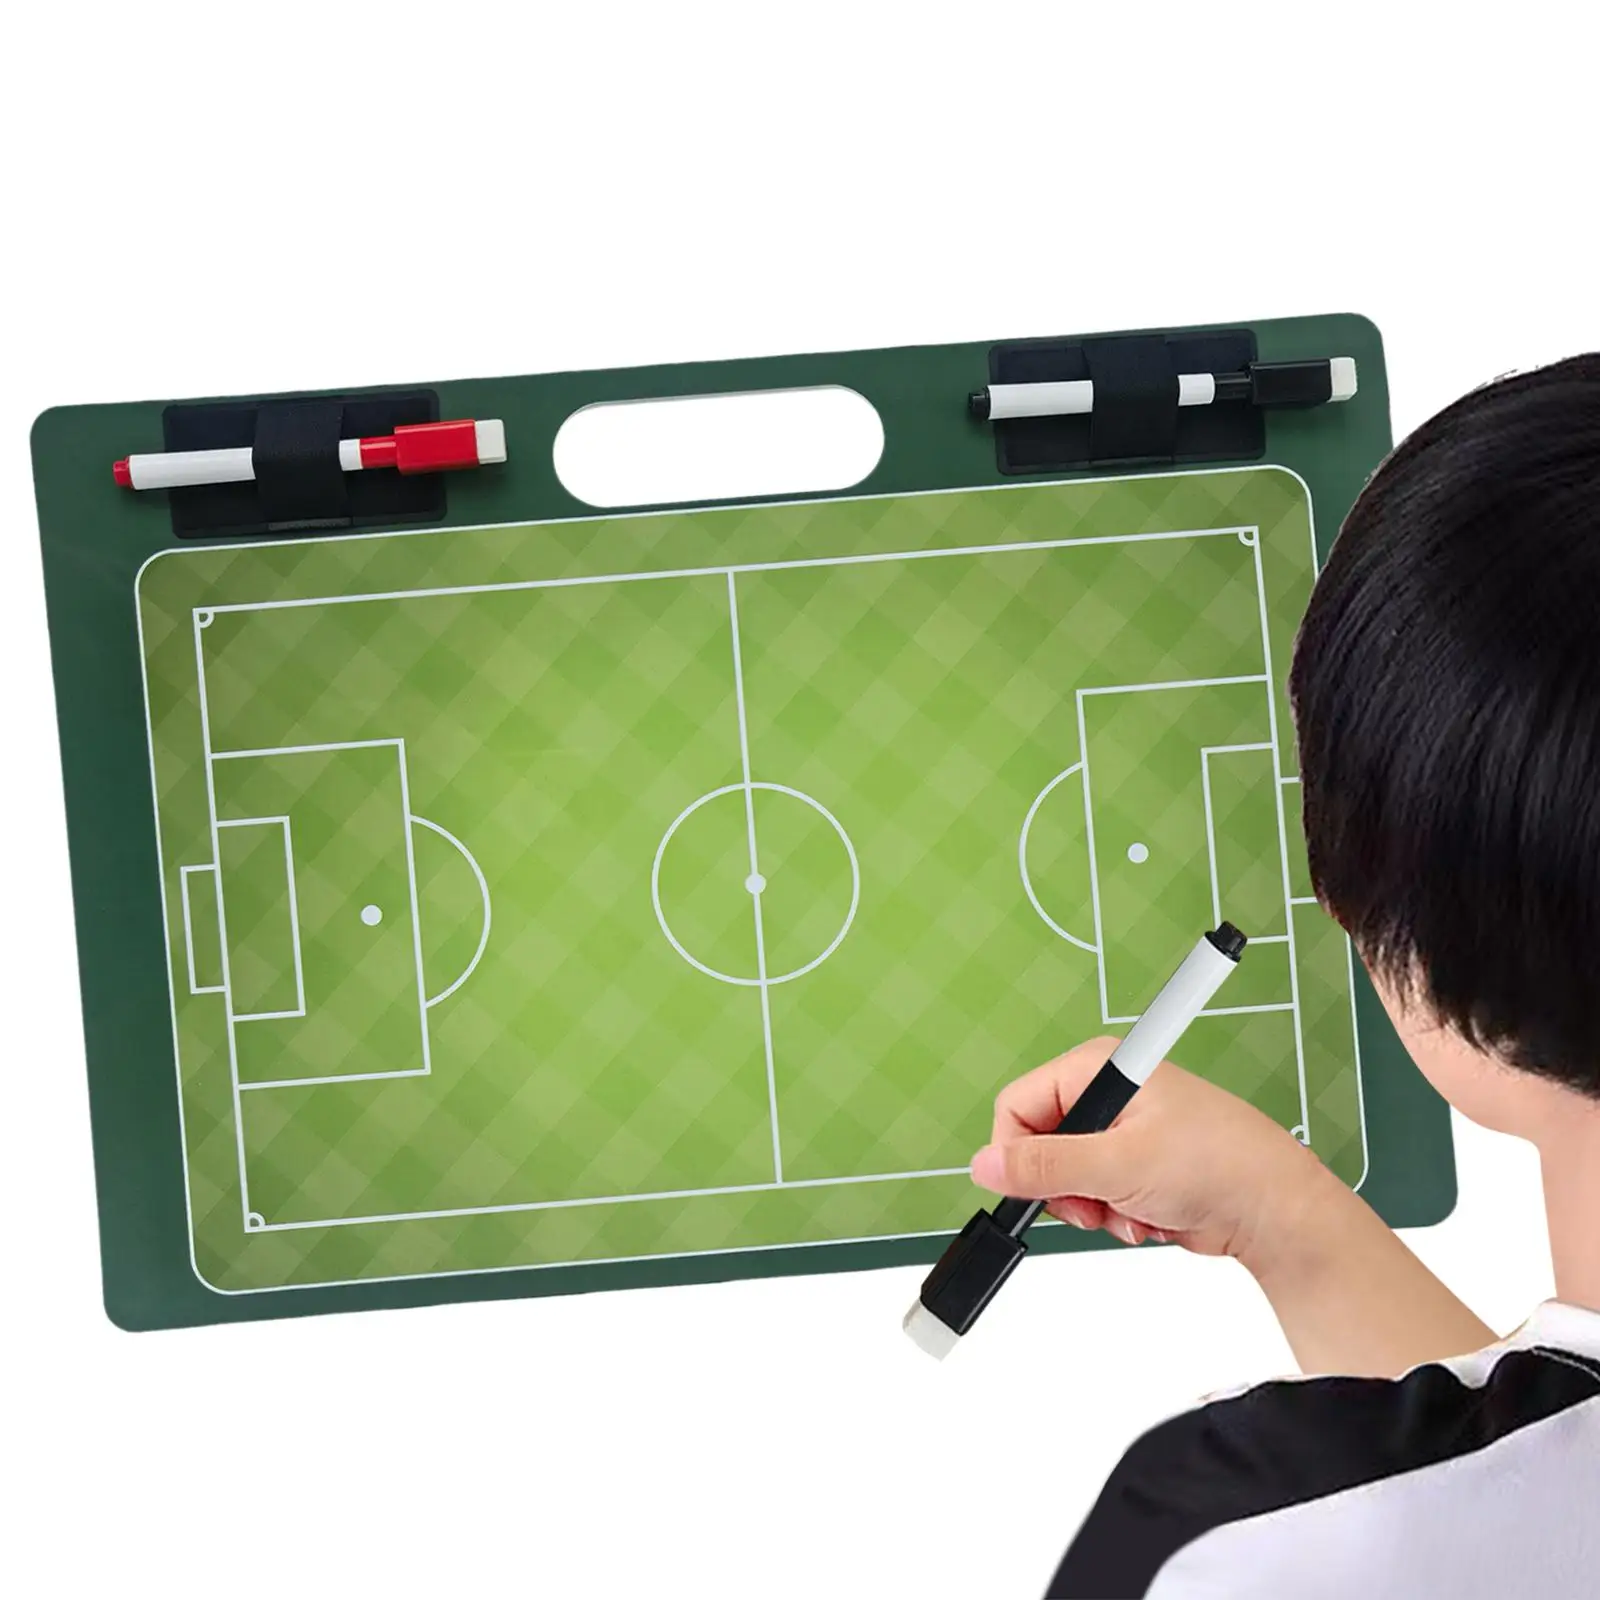 

Football Coaching Board Gifts Referee Gear Portable Marker Board Coaches Clipboard Soccer for Football Teaching Soccer Training